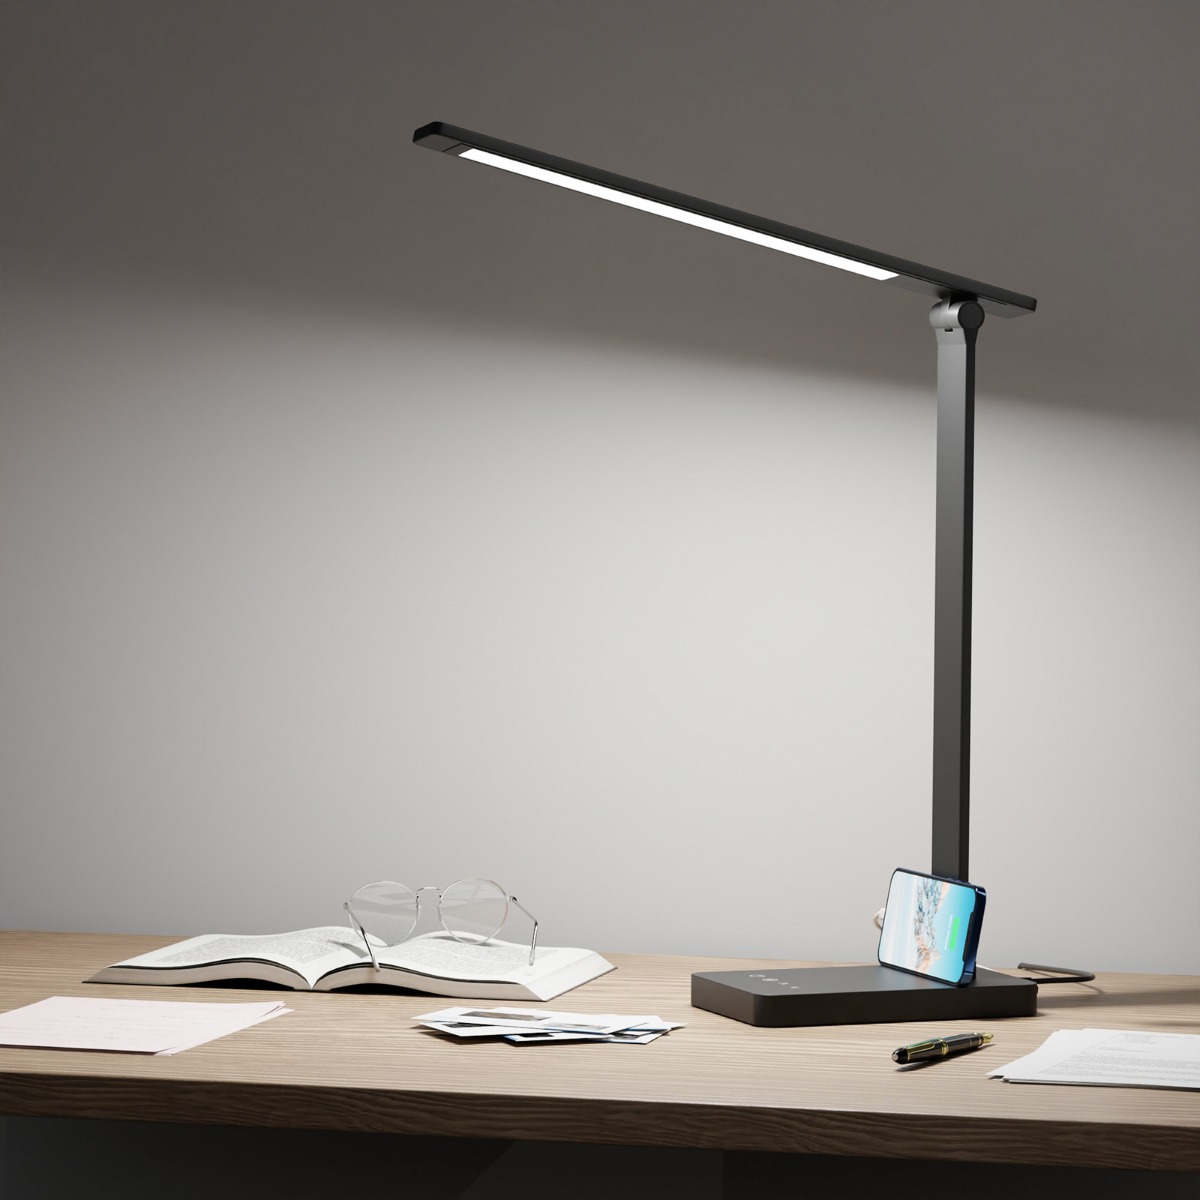 Iluminating Cordless Desk Lamp with Rechargeable Battery-Powered USB Charging Port 3 Levels Brightness Dimmable for Outdoor Modern Hotel Restaurant